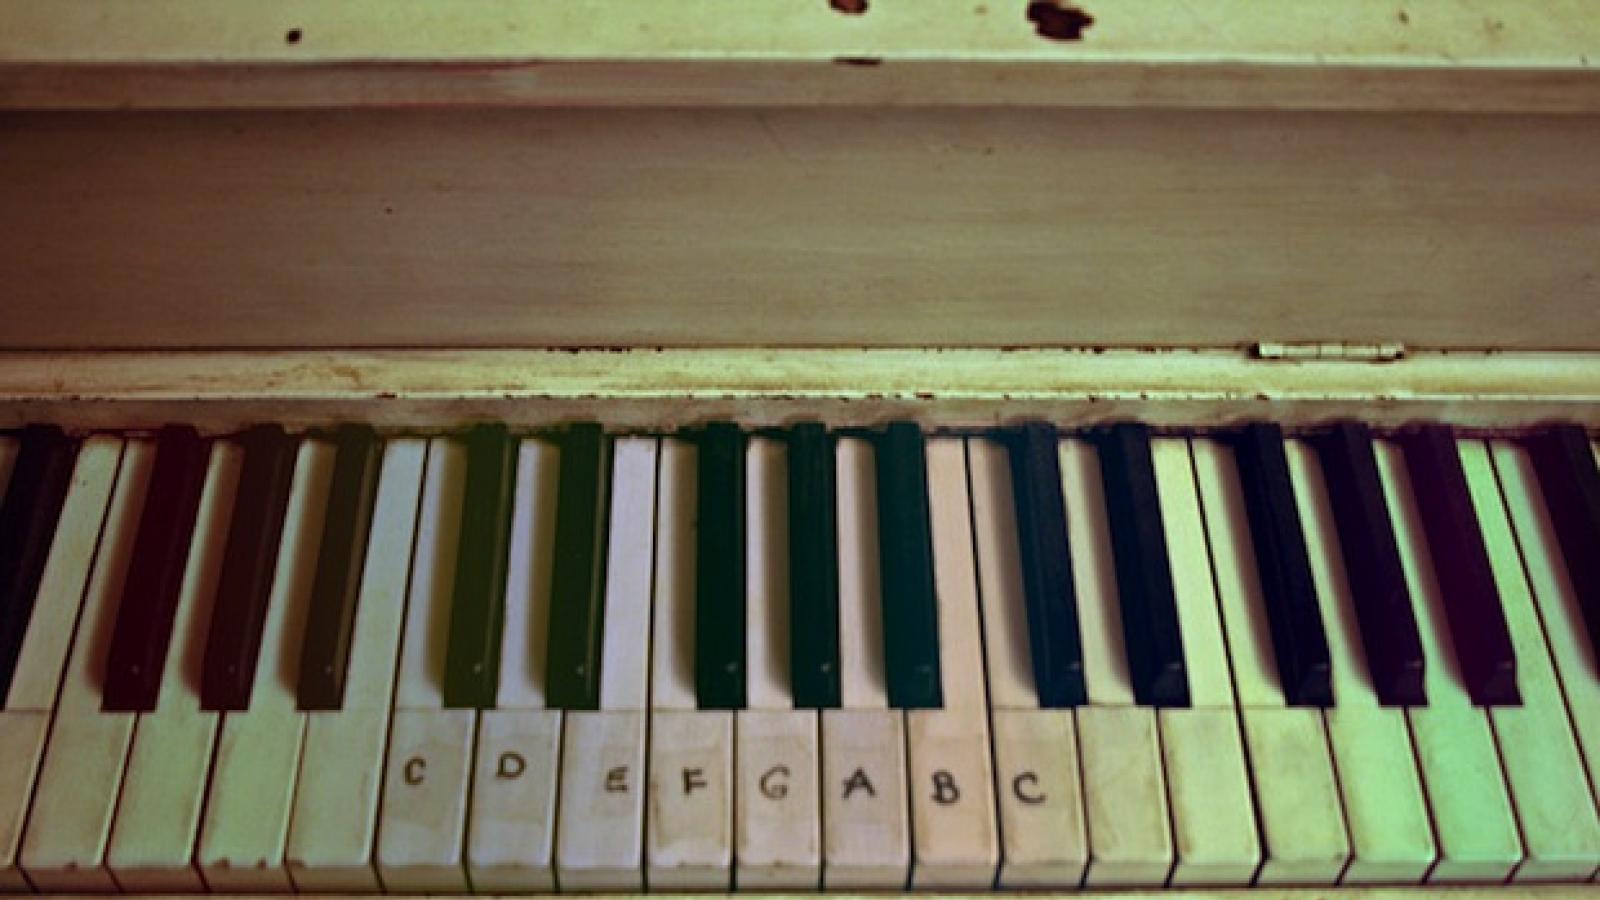 close-up of piano keyboard with white keys labeled C, D, E, F, G, A, B, C